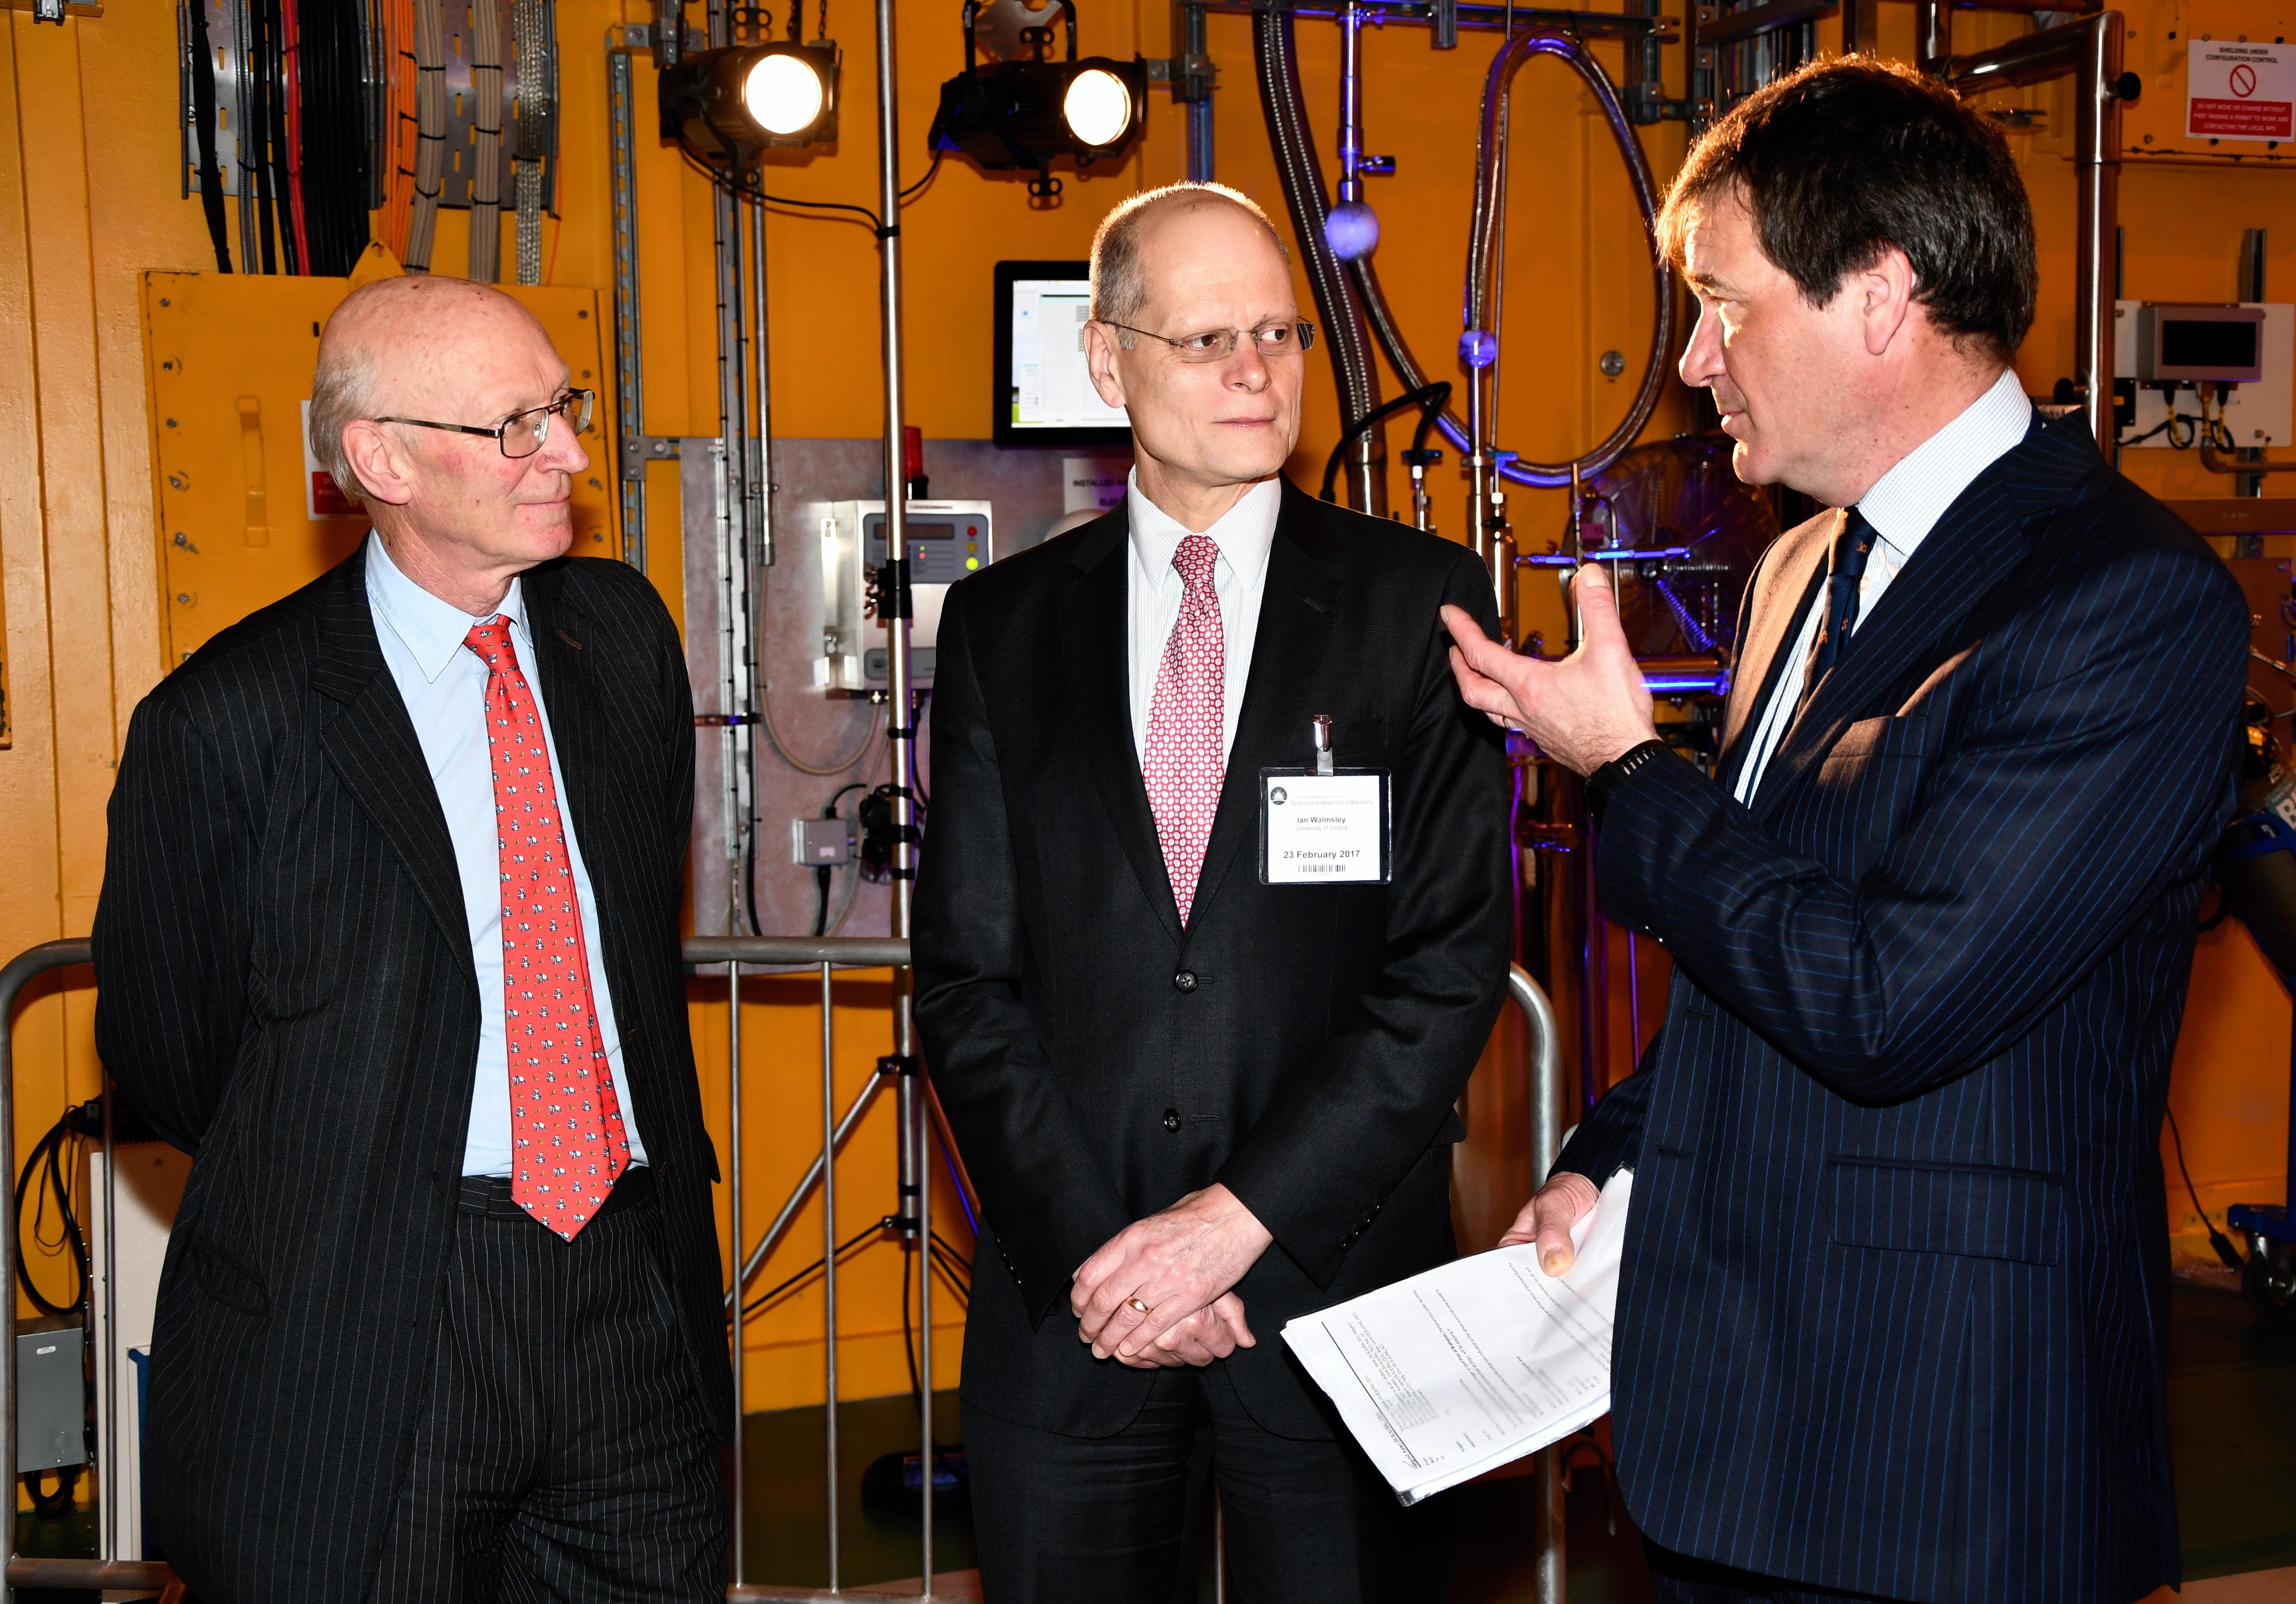 Lord Prior with Prof. Walmsley and Prof. Harrison